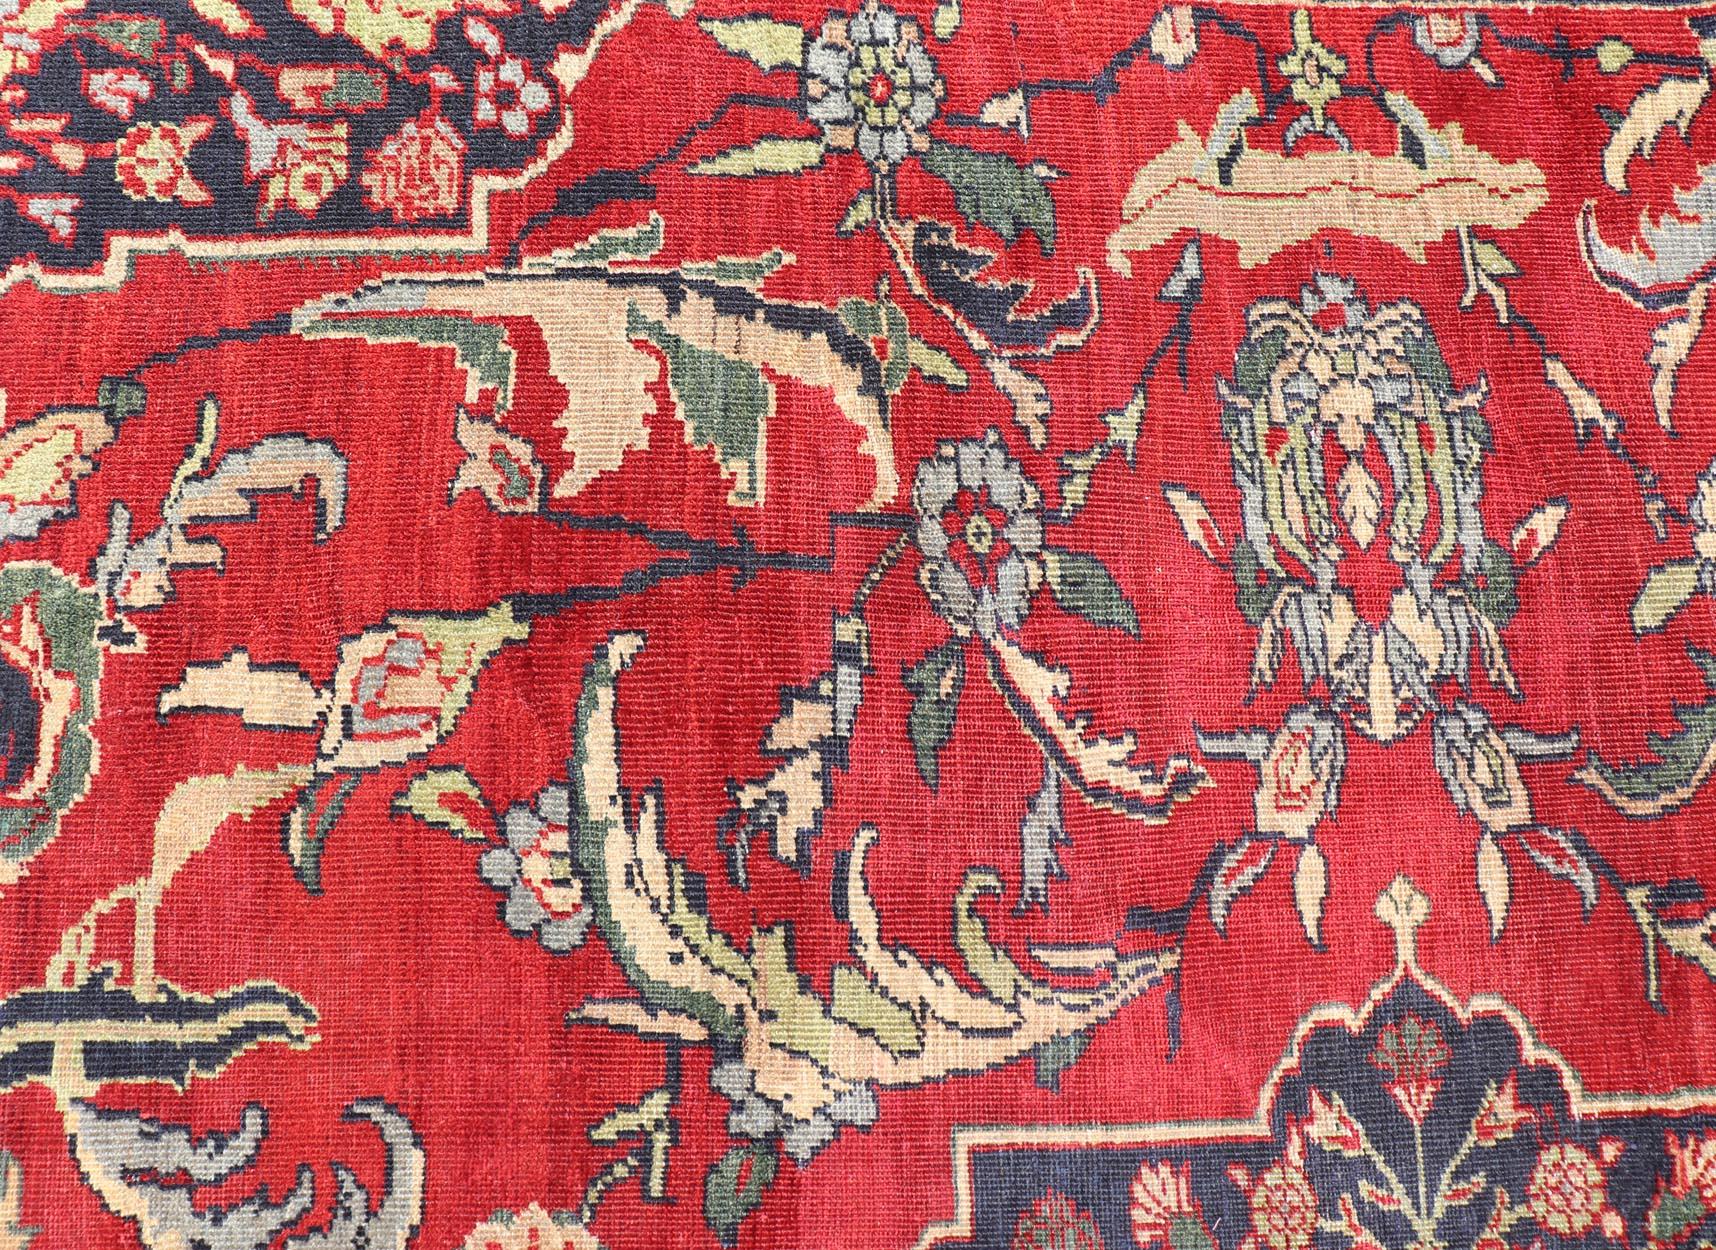 Antique Persian Zeigler Sultanabad Rug with Botanical Elements Set on Red Field For Sale 7